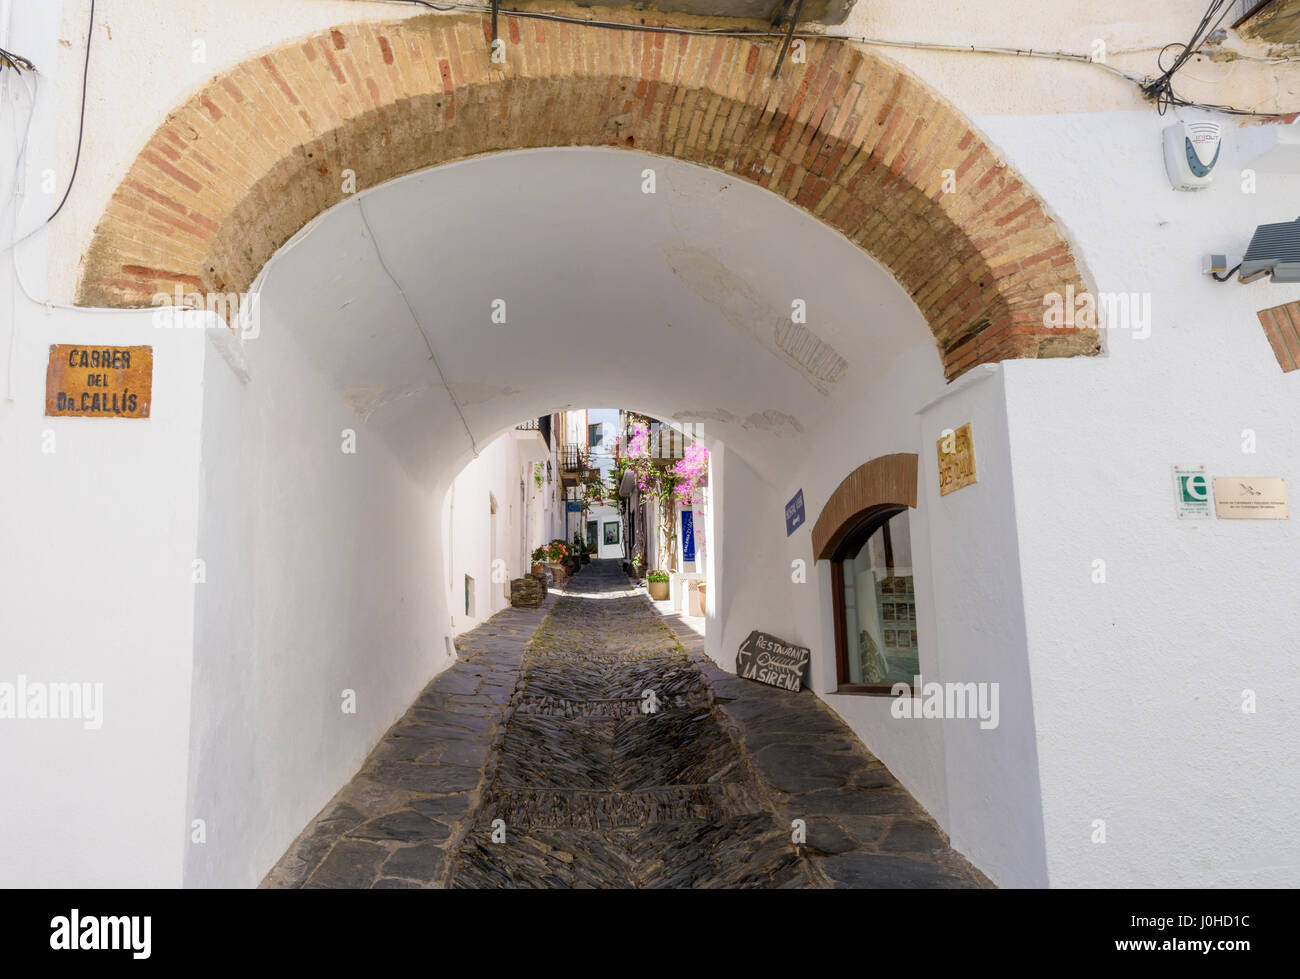 An arch passageway through a whitewashed building along Carrer des Call known for its herringbone rastell cobble pavement, Cadaques, Catalonia, Spain Stock Photo